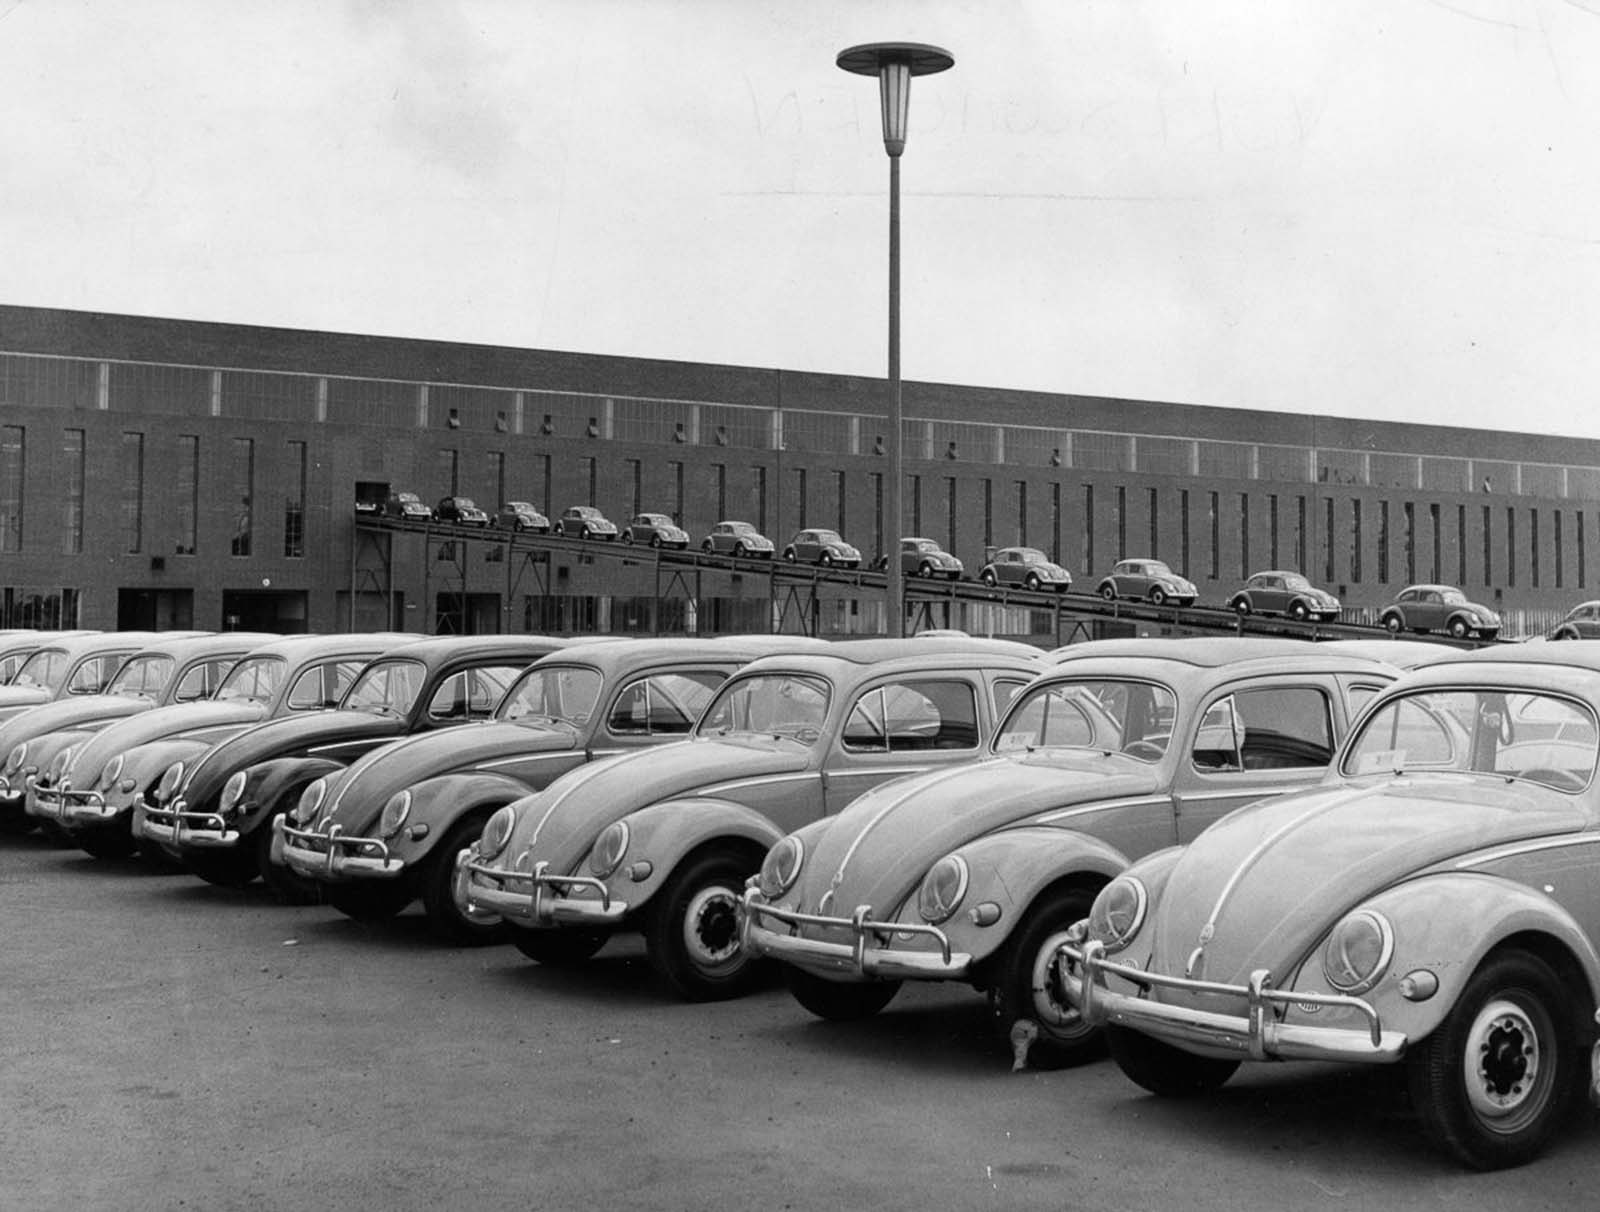 New Beetles coming out of the factory. 1956.